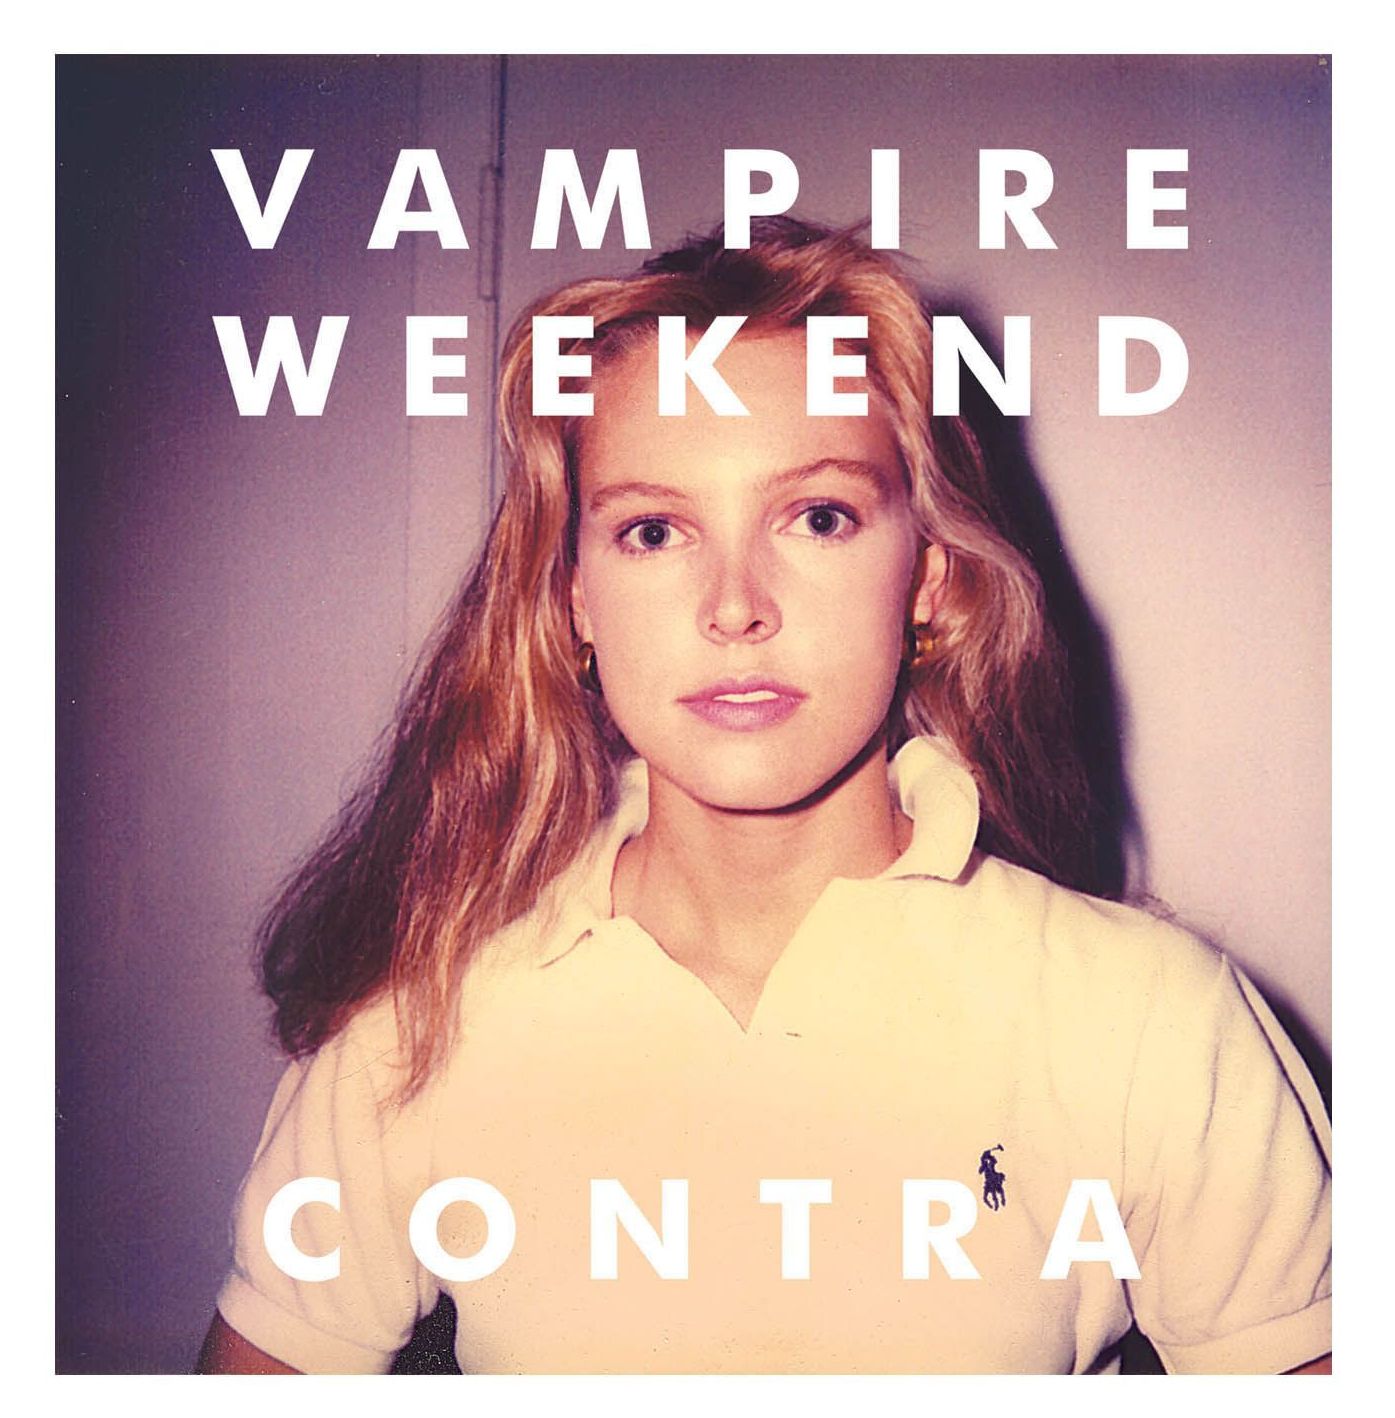 The album cover for Vampire Weekend's Contra